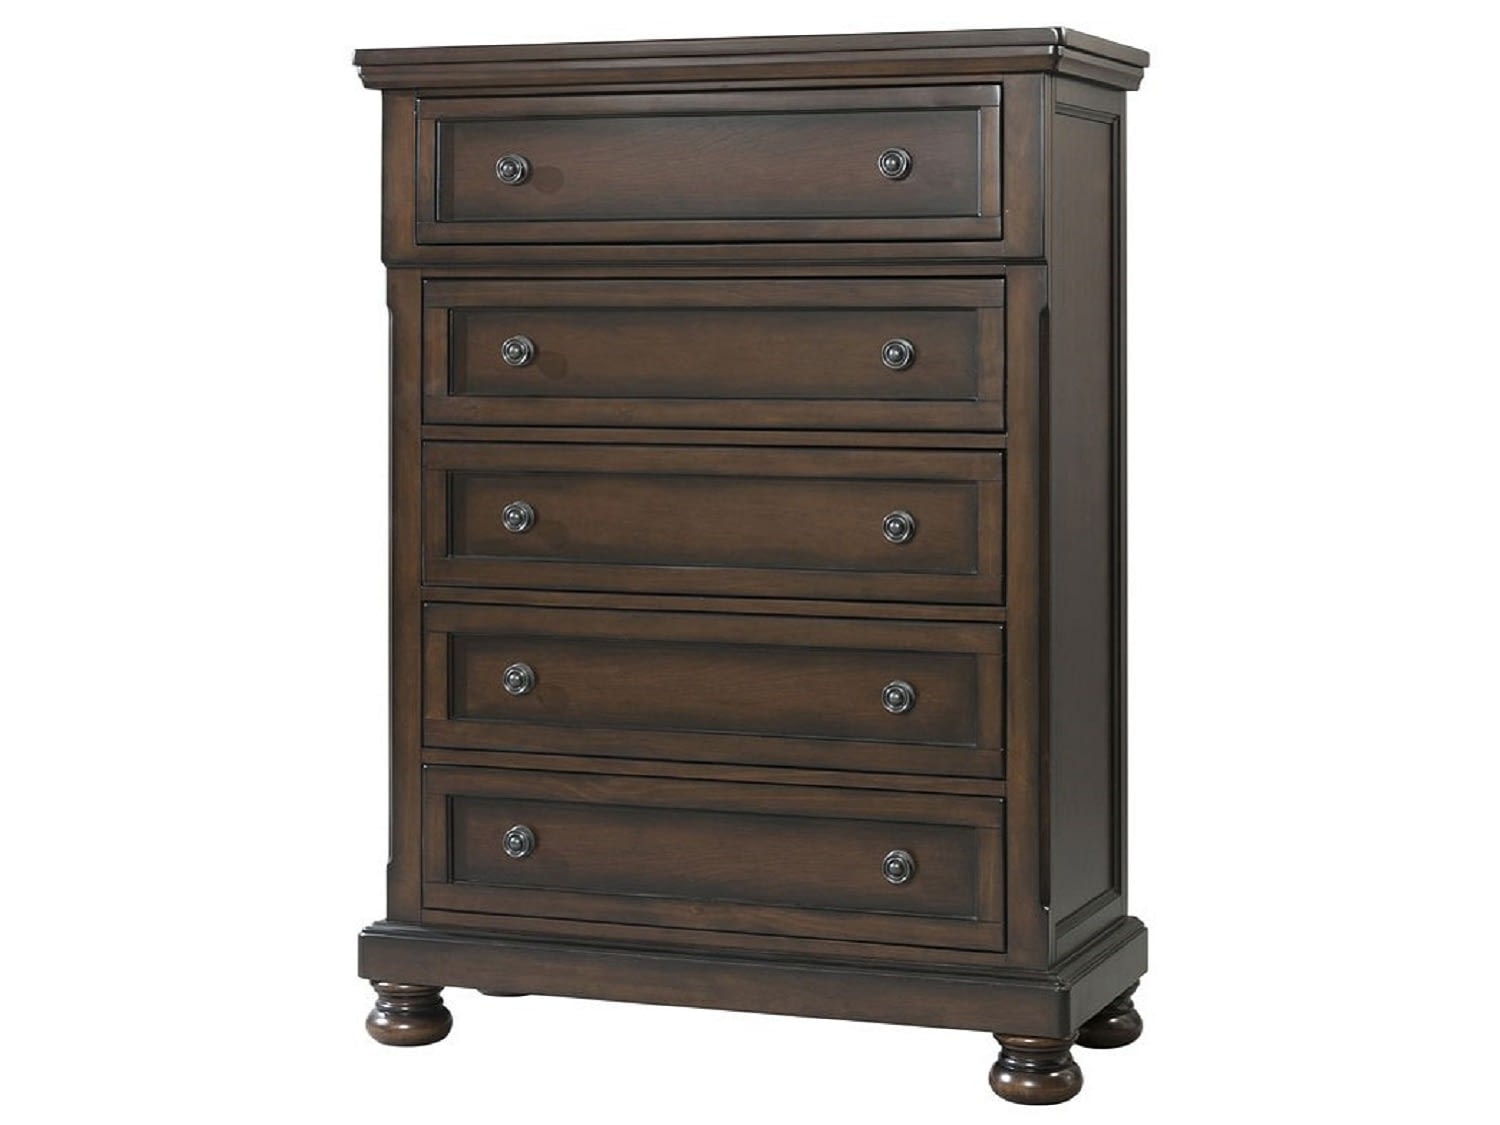 CHARLTON Chest of Drawers - Side